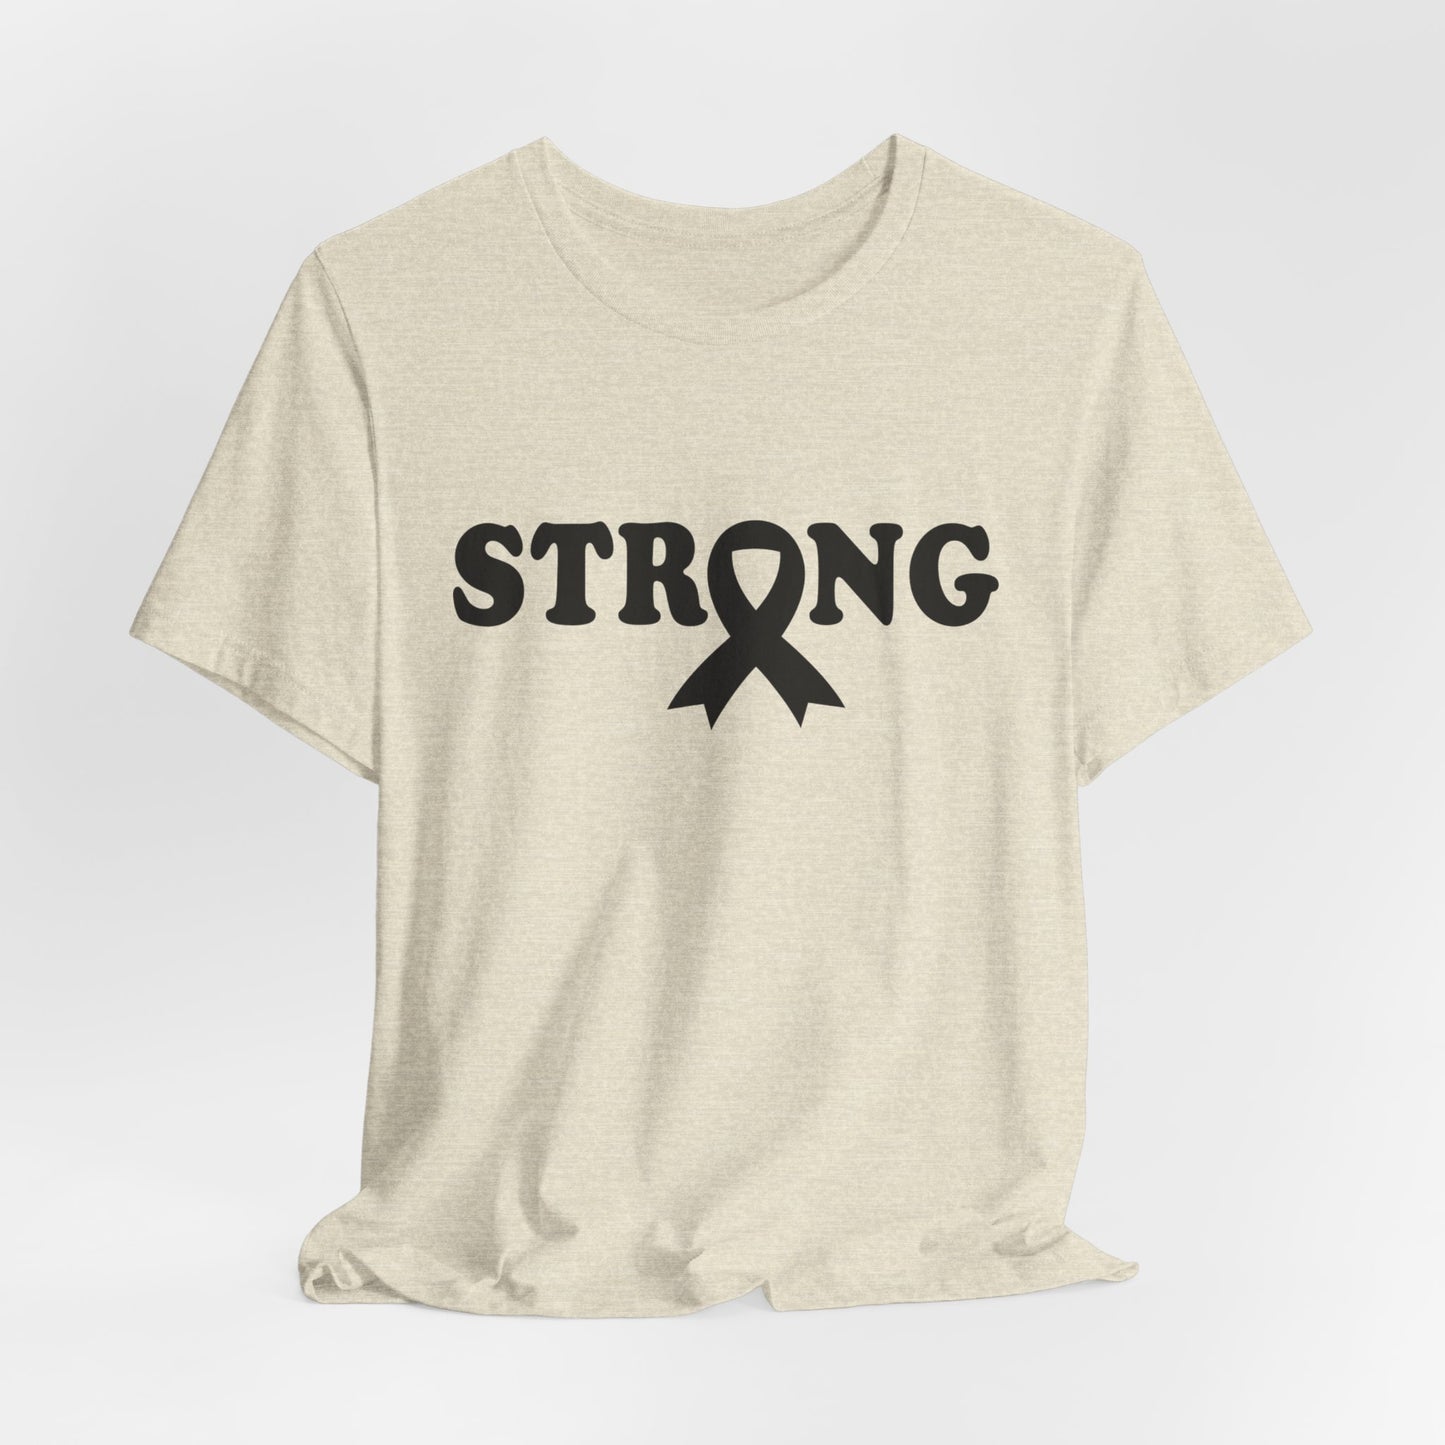 Strong Cancer Advocacy Adult Unisex Short Sleeve Tee